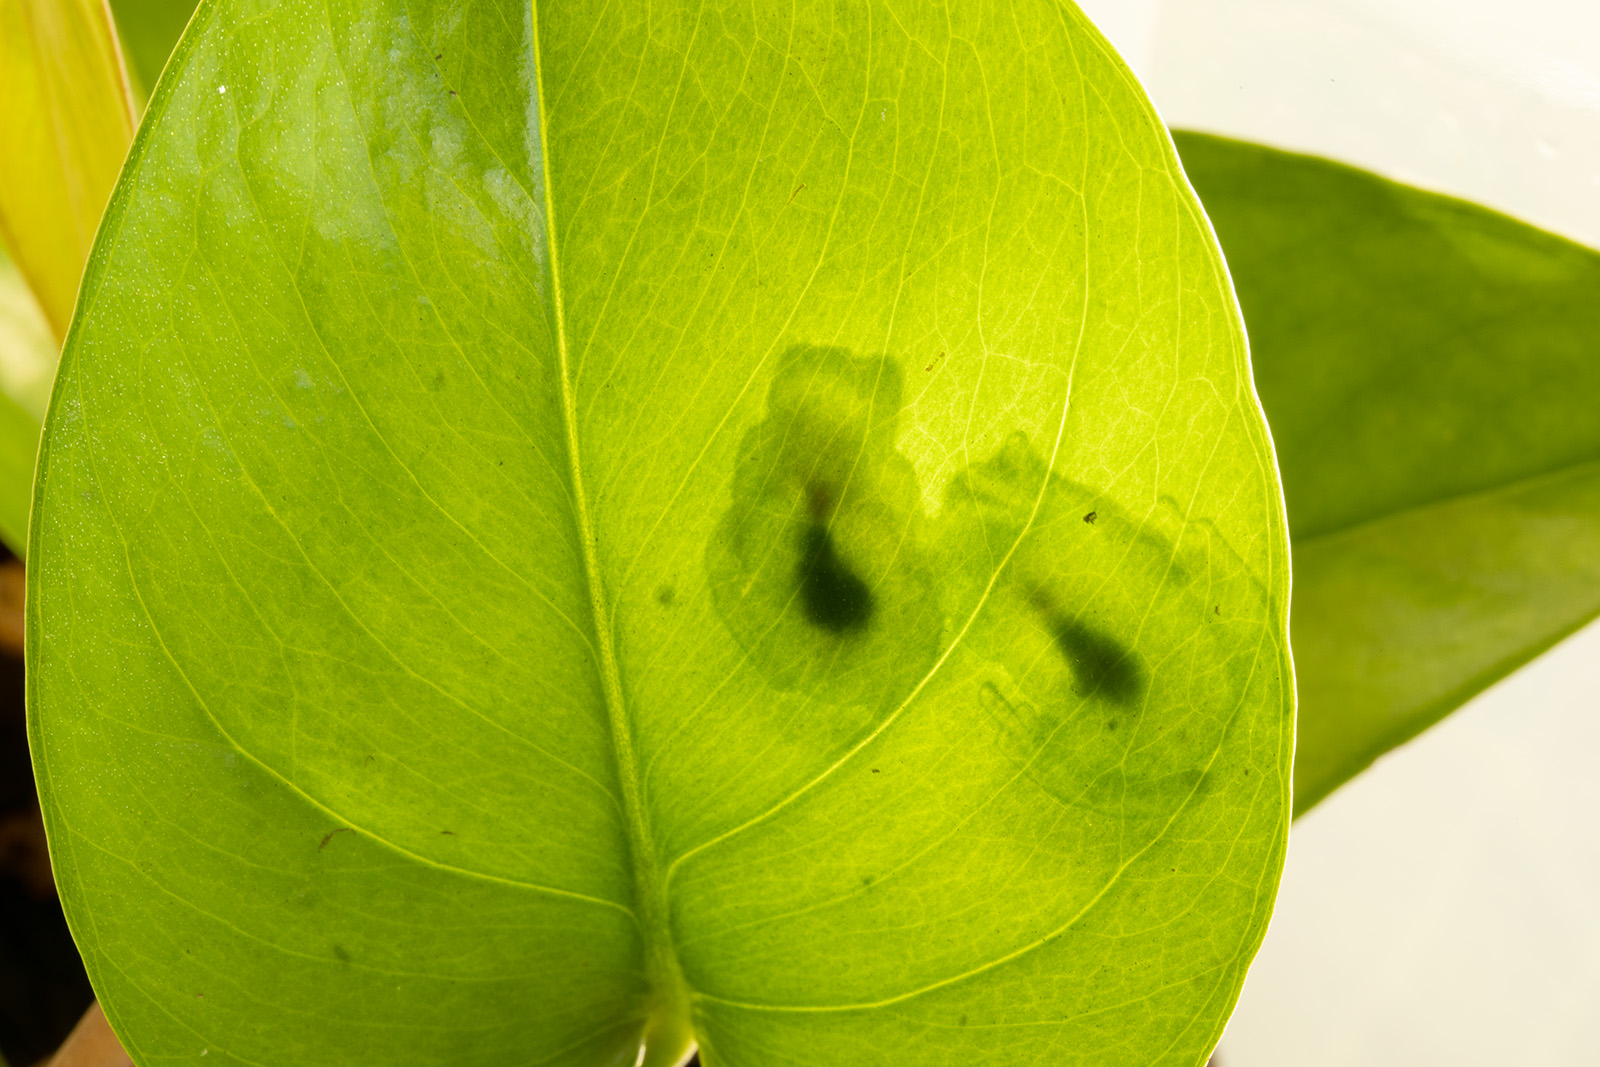 a pair of mating glassfrogs, sleeping together, upside down on a leaf. The pair was photographed in transmitted light (backlit) from the upper side of the leaf. 